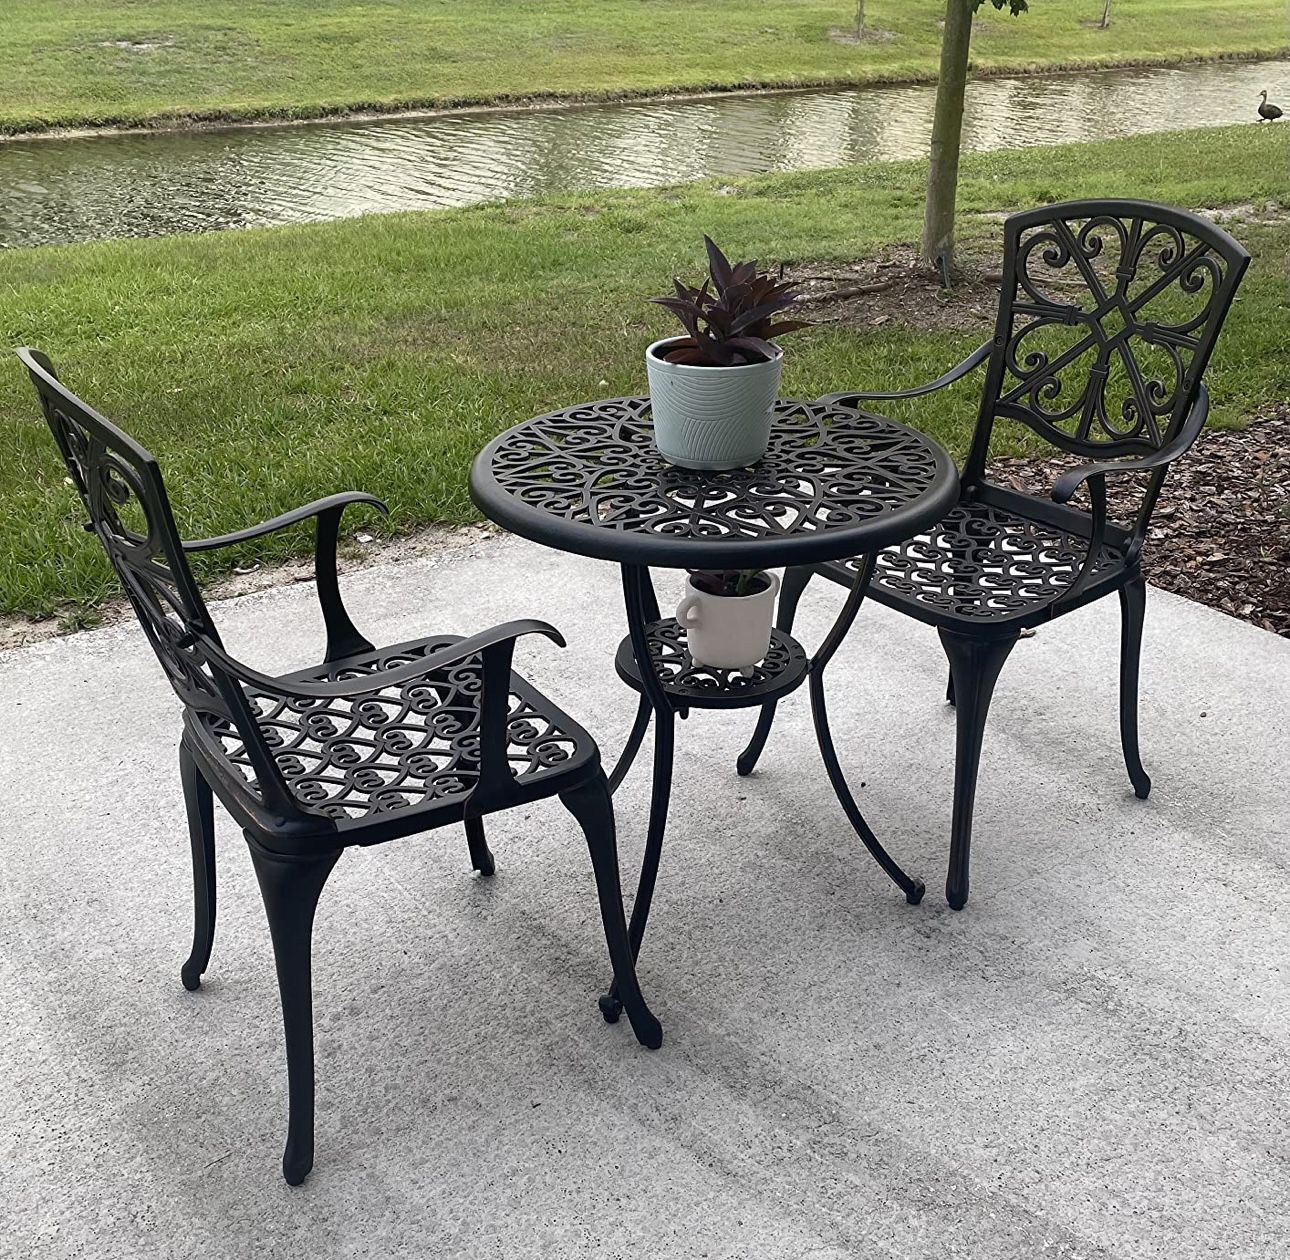 Bistro Table Set,3 PCs Cast Aluminum Outdoor Furniture Weather Resistant Patio Table and Chairs